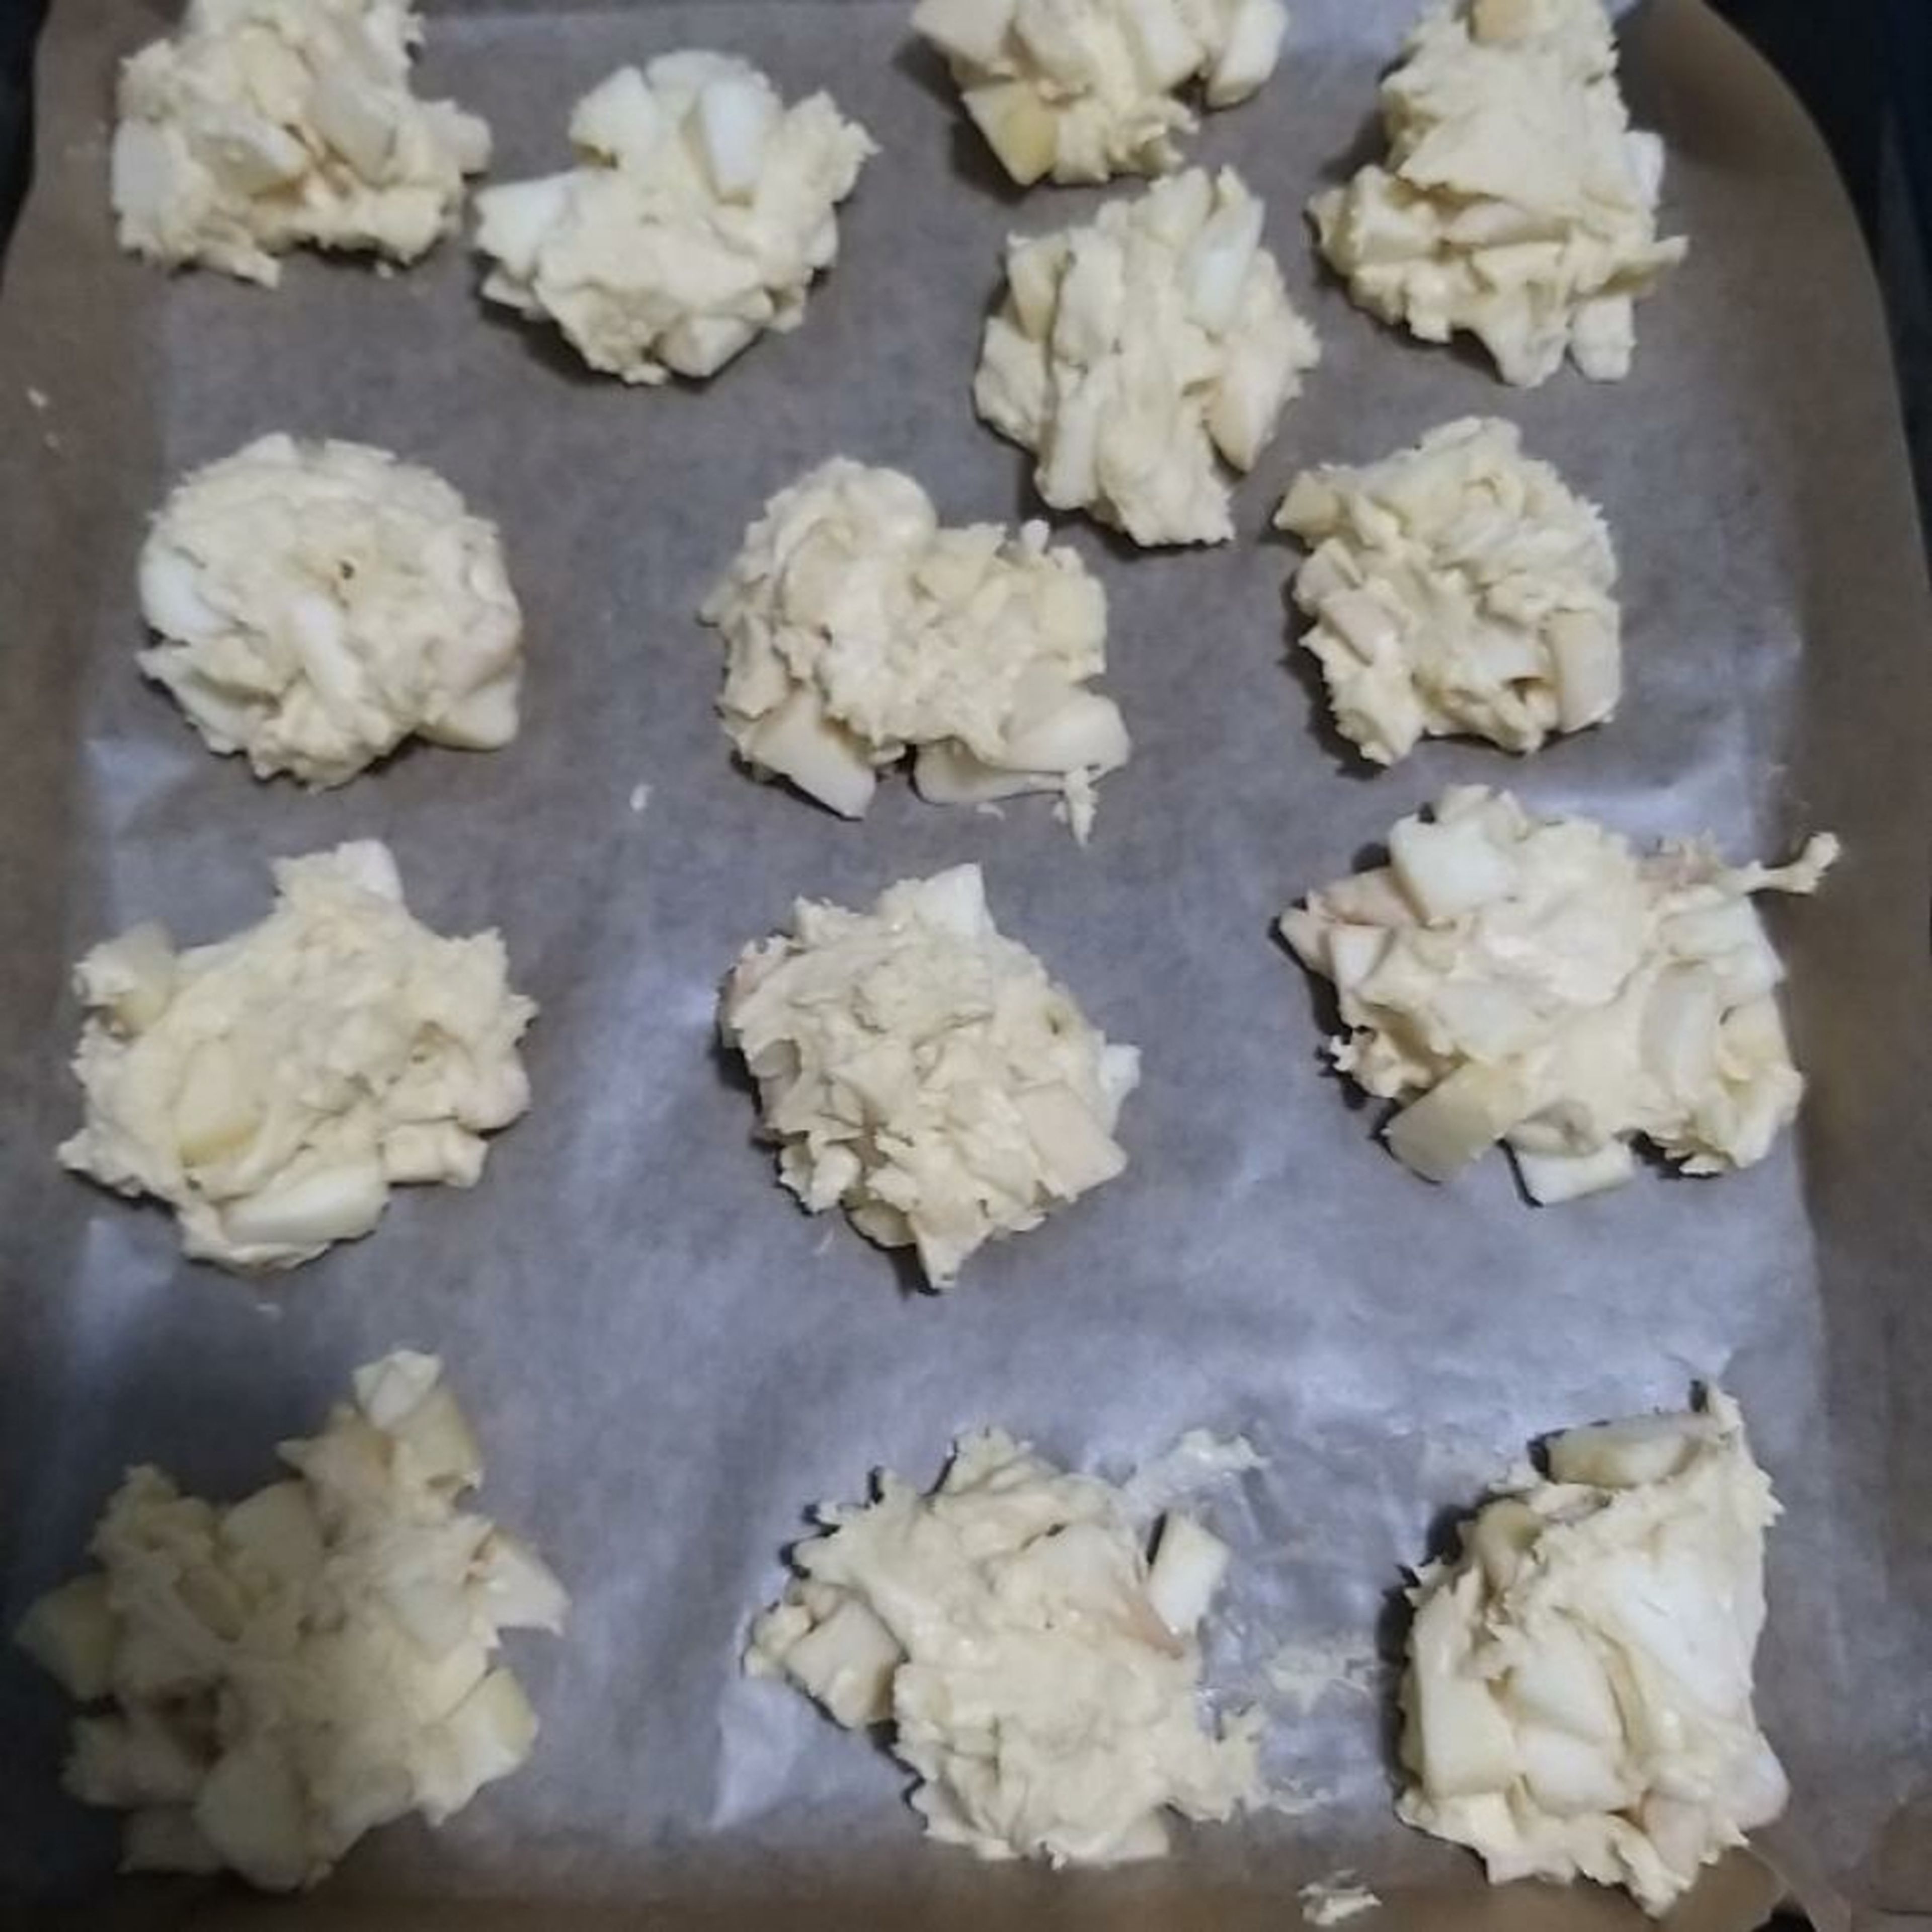 And the end : We make balls and place like it is in the photo and put the mixture into the hot oven and bake for 20 min. Ju bëftë mirë ( in albanian) meaning enjoy your meal.